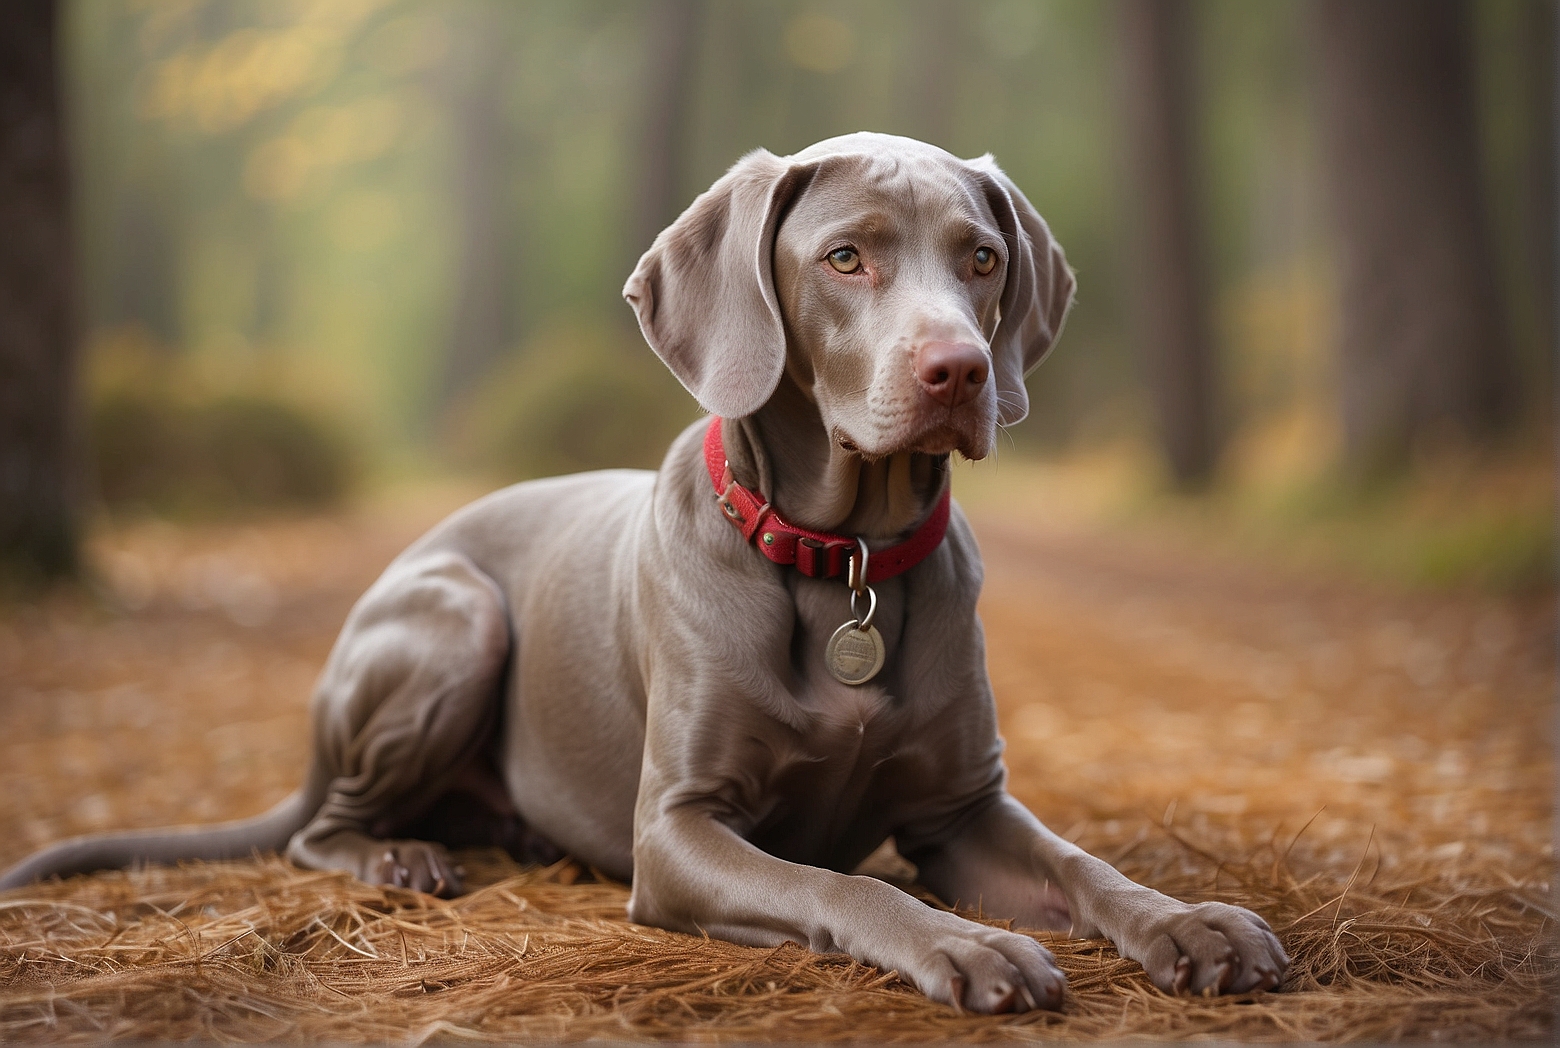 Tips for Keeping Your Weimaraner’s Coat Shiny